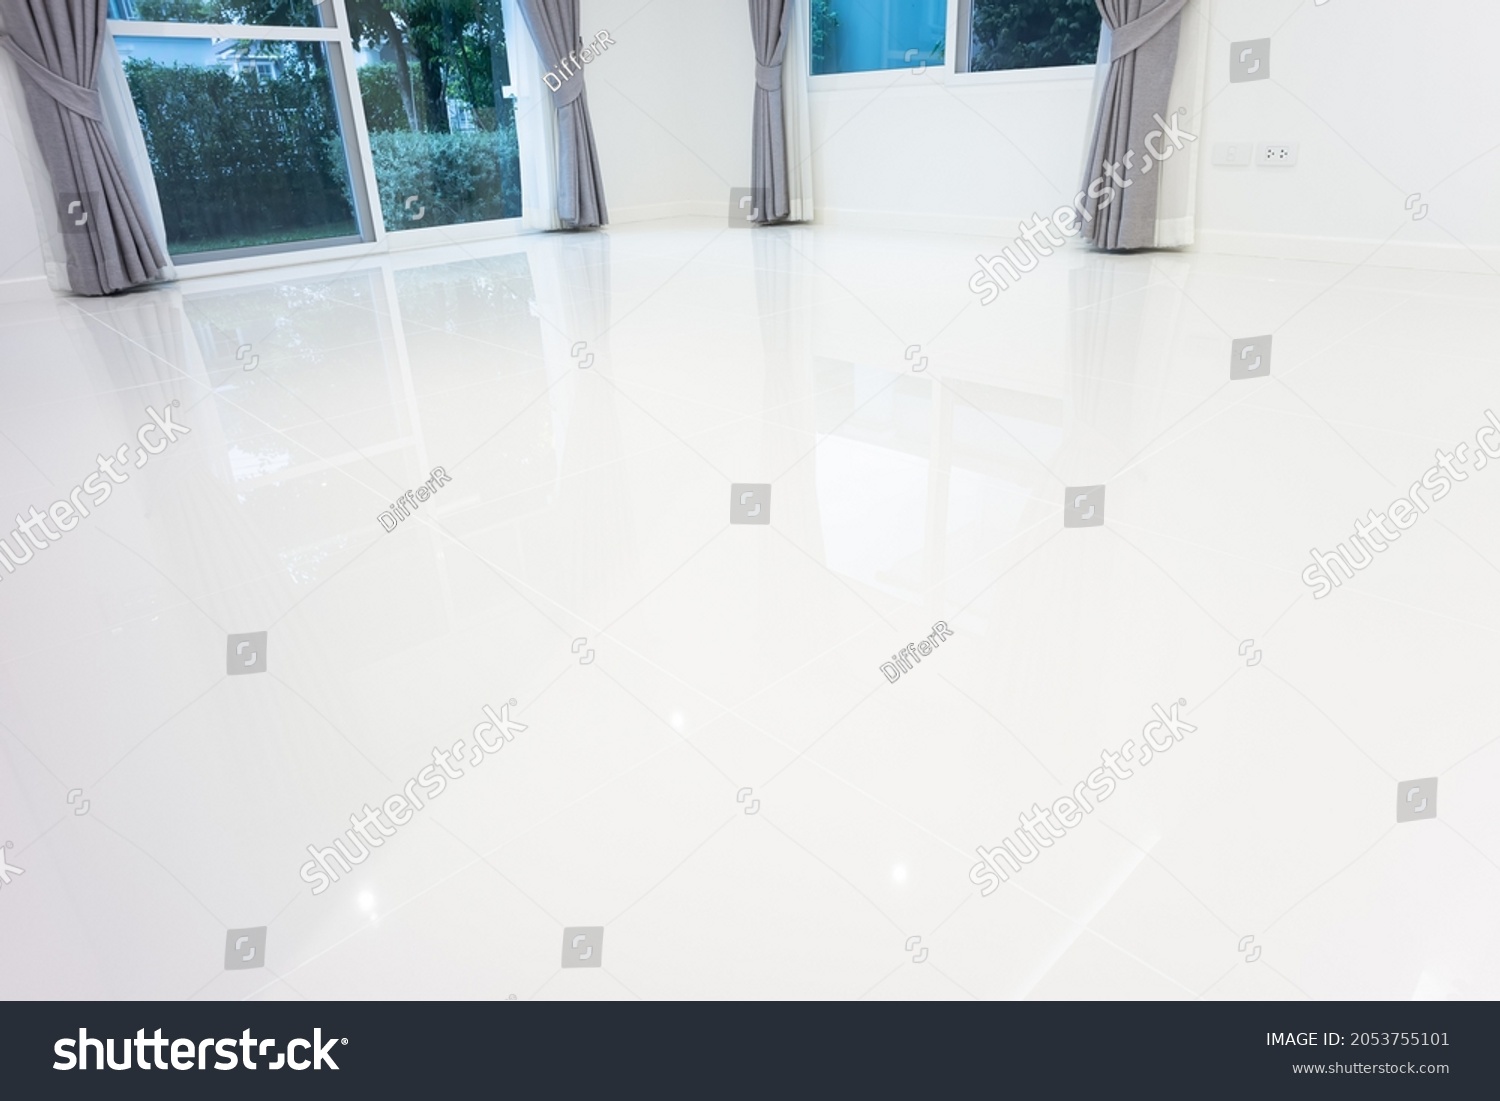 White tile floor with grid line of square texture pattern in perspective. Clean shiny of ceramic surface. Modern interior home design for bathroom, kitchen and laundry room. Empty space for background #2053755101